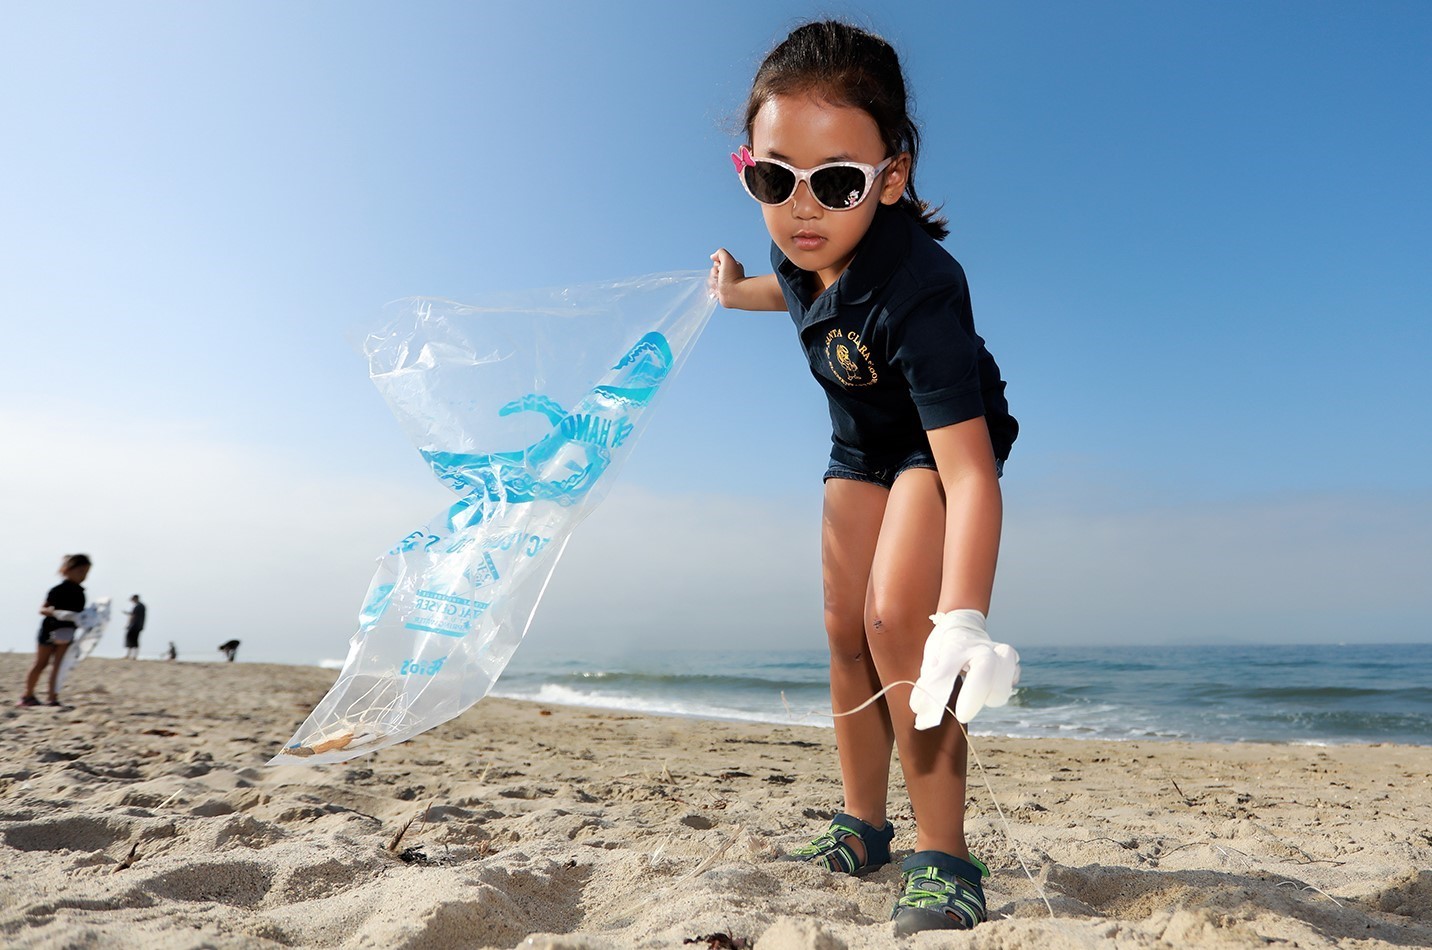 On a beach, a young child holds a trash bag in one hand as she leans down to pick up some fishing line